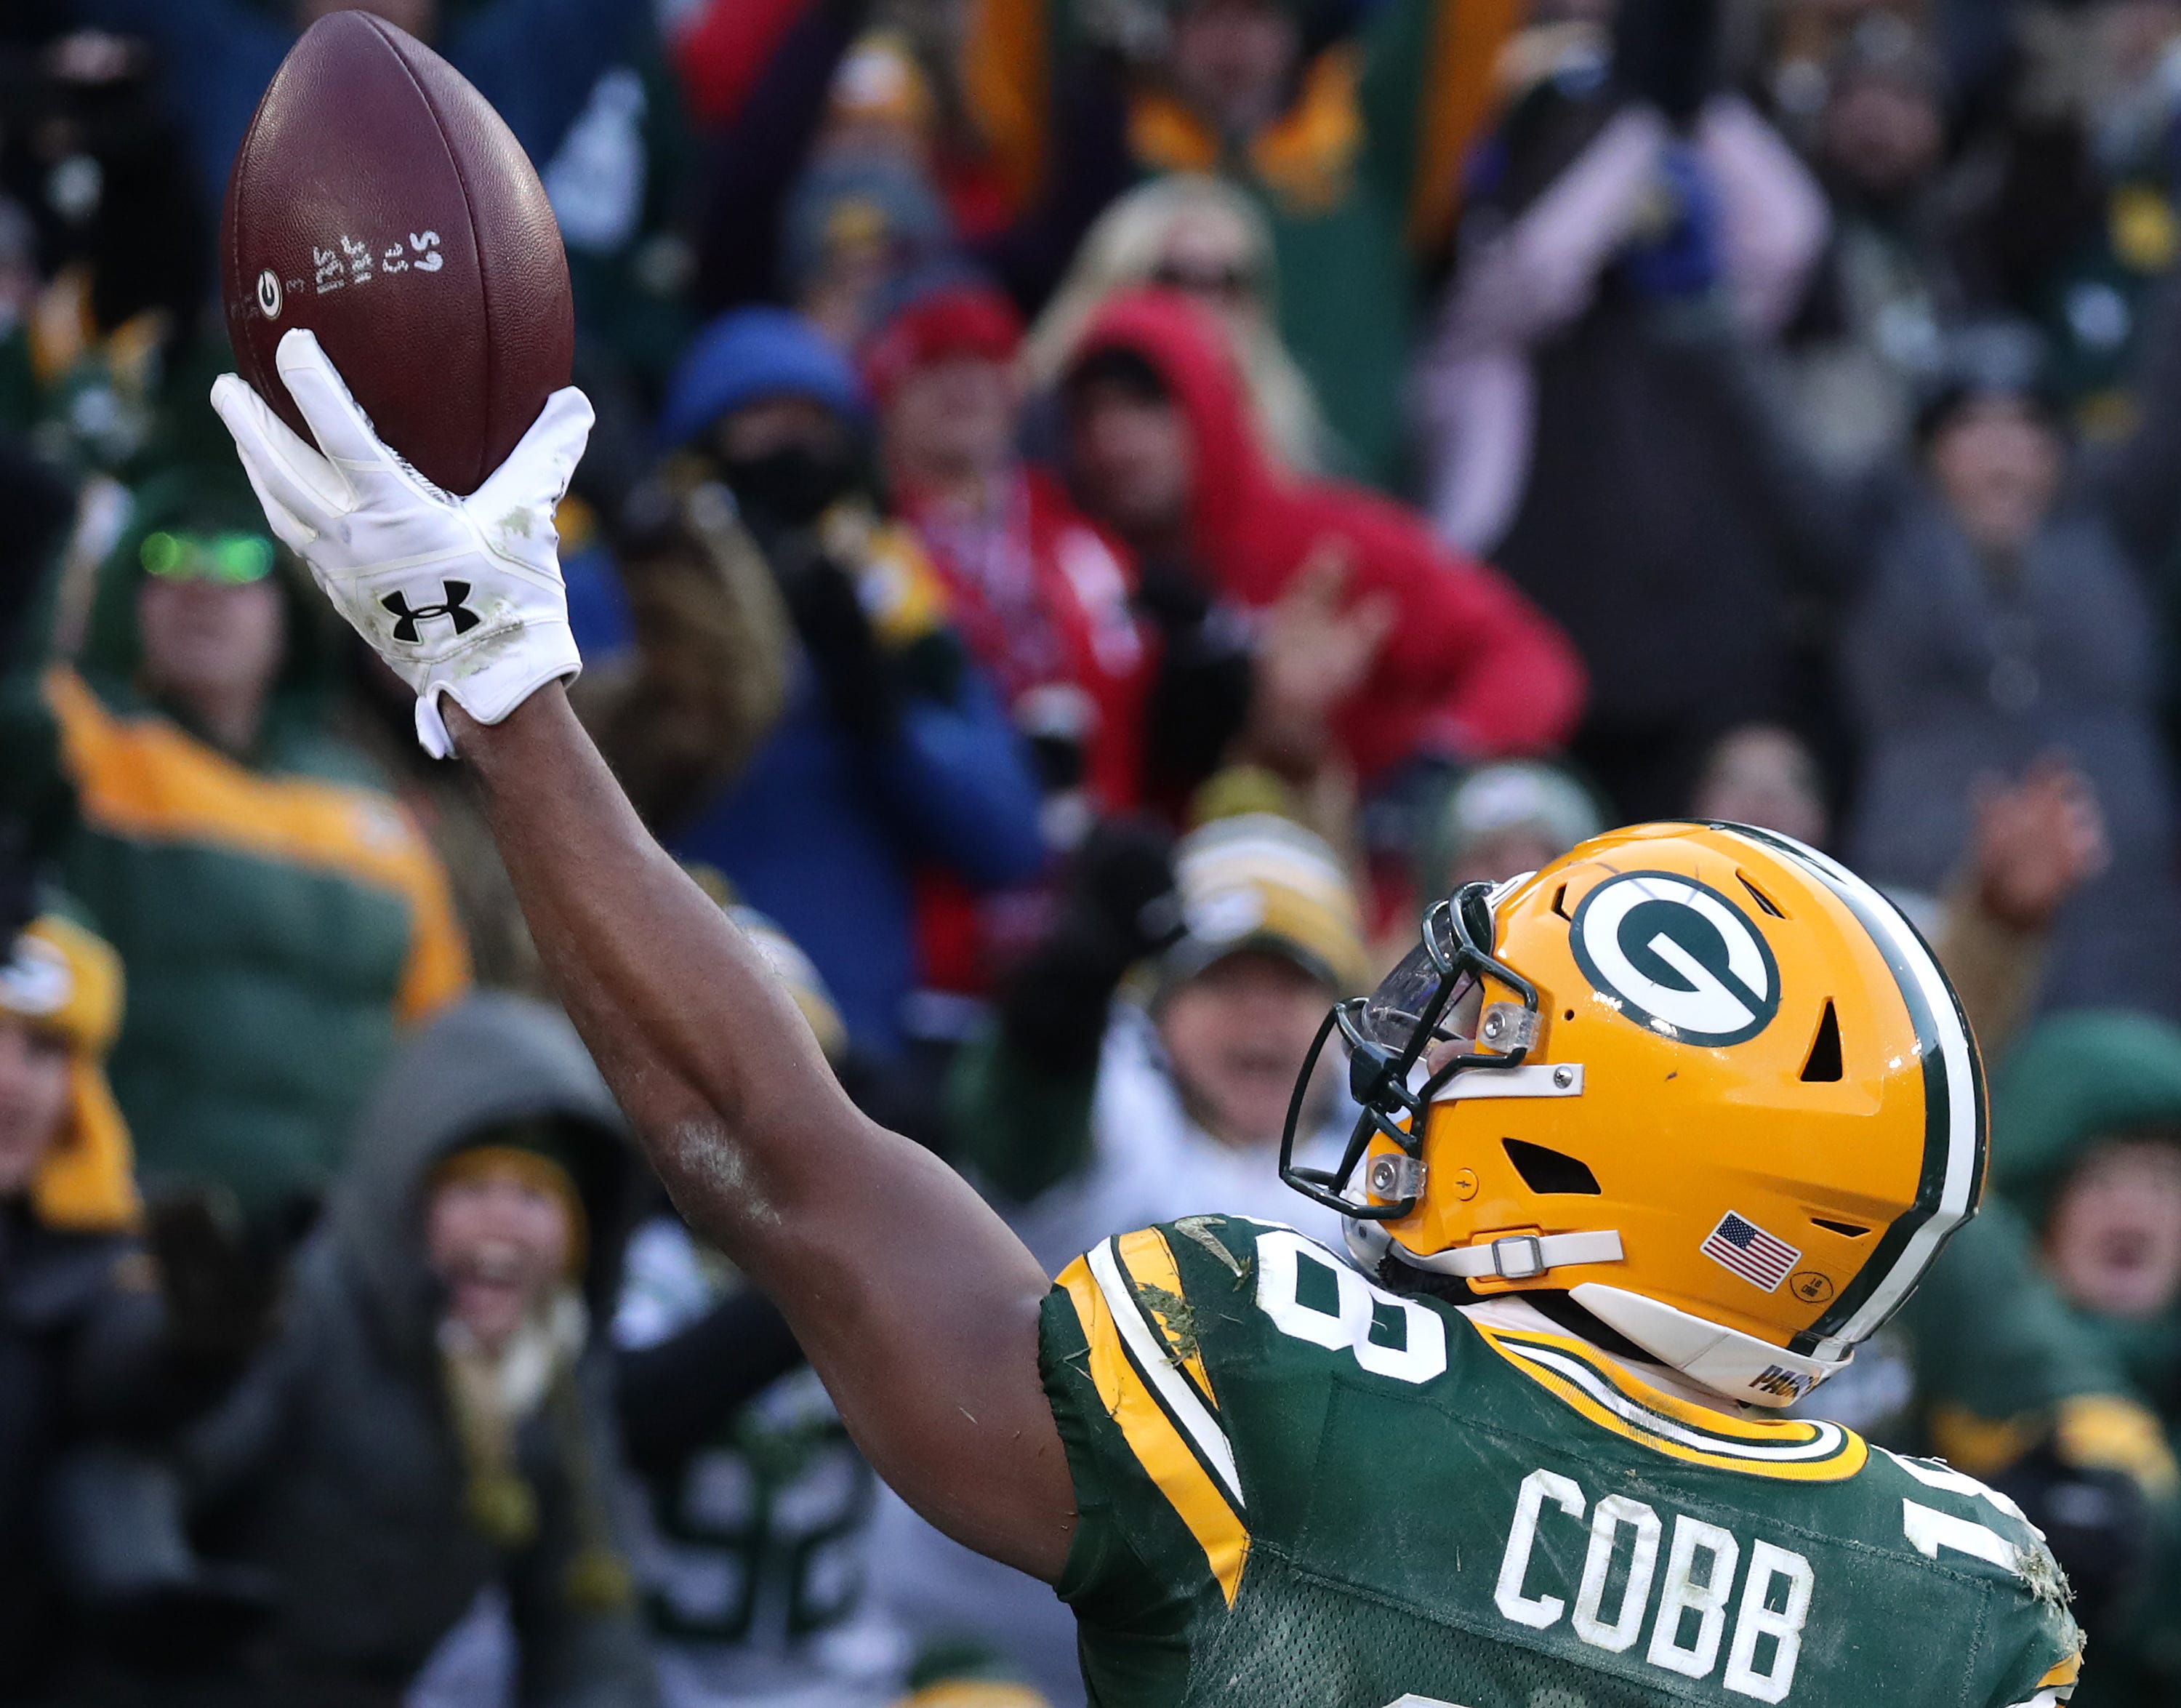 Green Bay Packers wide receiver Randall Cobb celebrates a touchdown against the Atlanta Falcons during their football game on Sunday, December 9, 2018, at Lambeau Field in Green Bay, Wis.
Wm. Glasheen/USA TODAY NETWORK-Wisconsin.